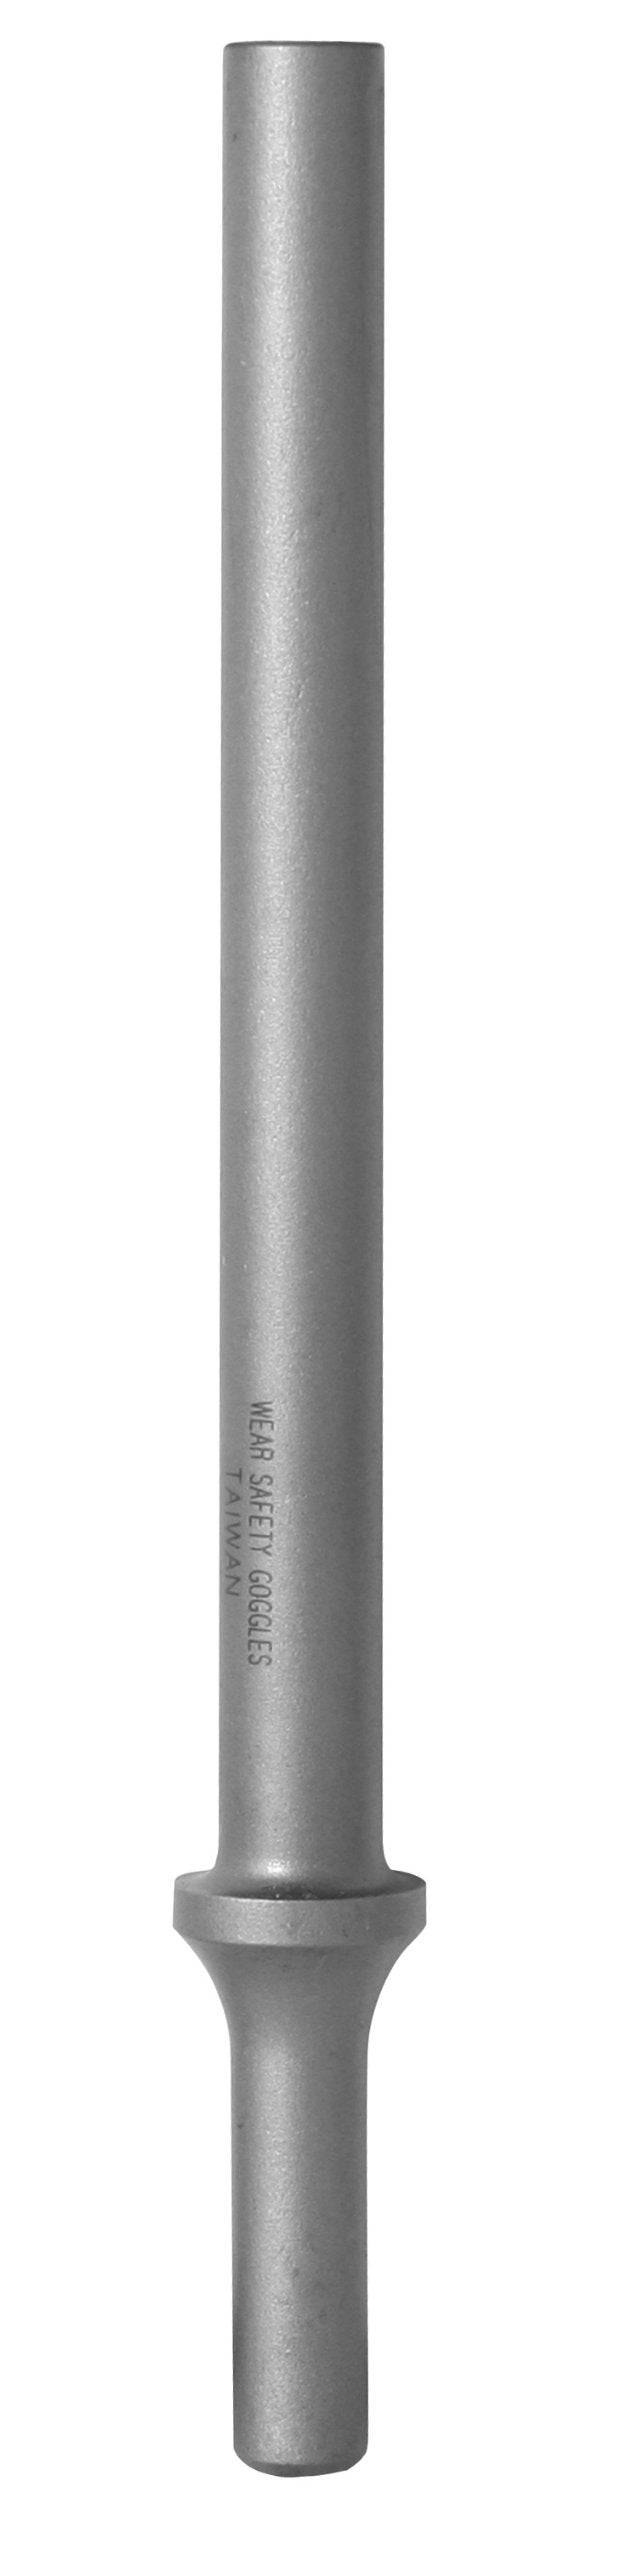  [AUSTRALIA] - Chicago Pneumatic A047074 7-Inch Straight Punch Chisel